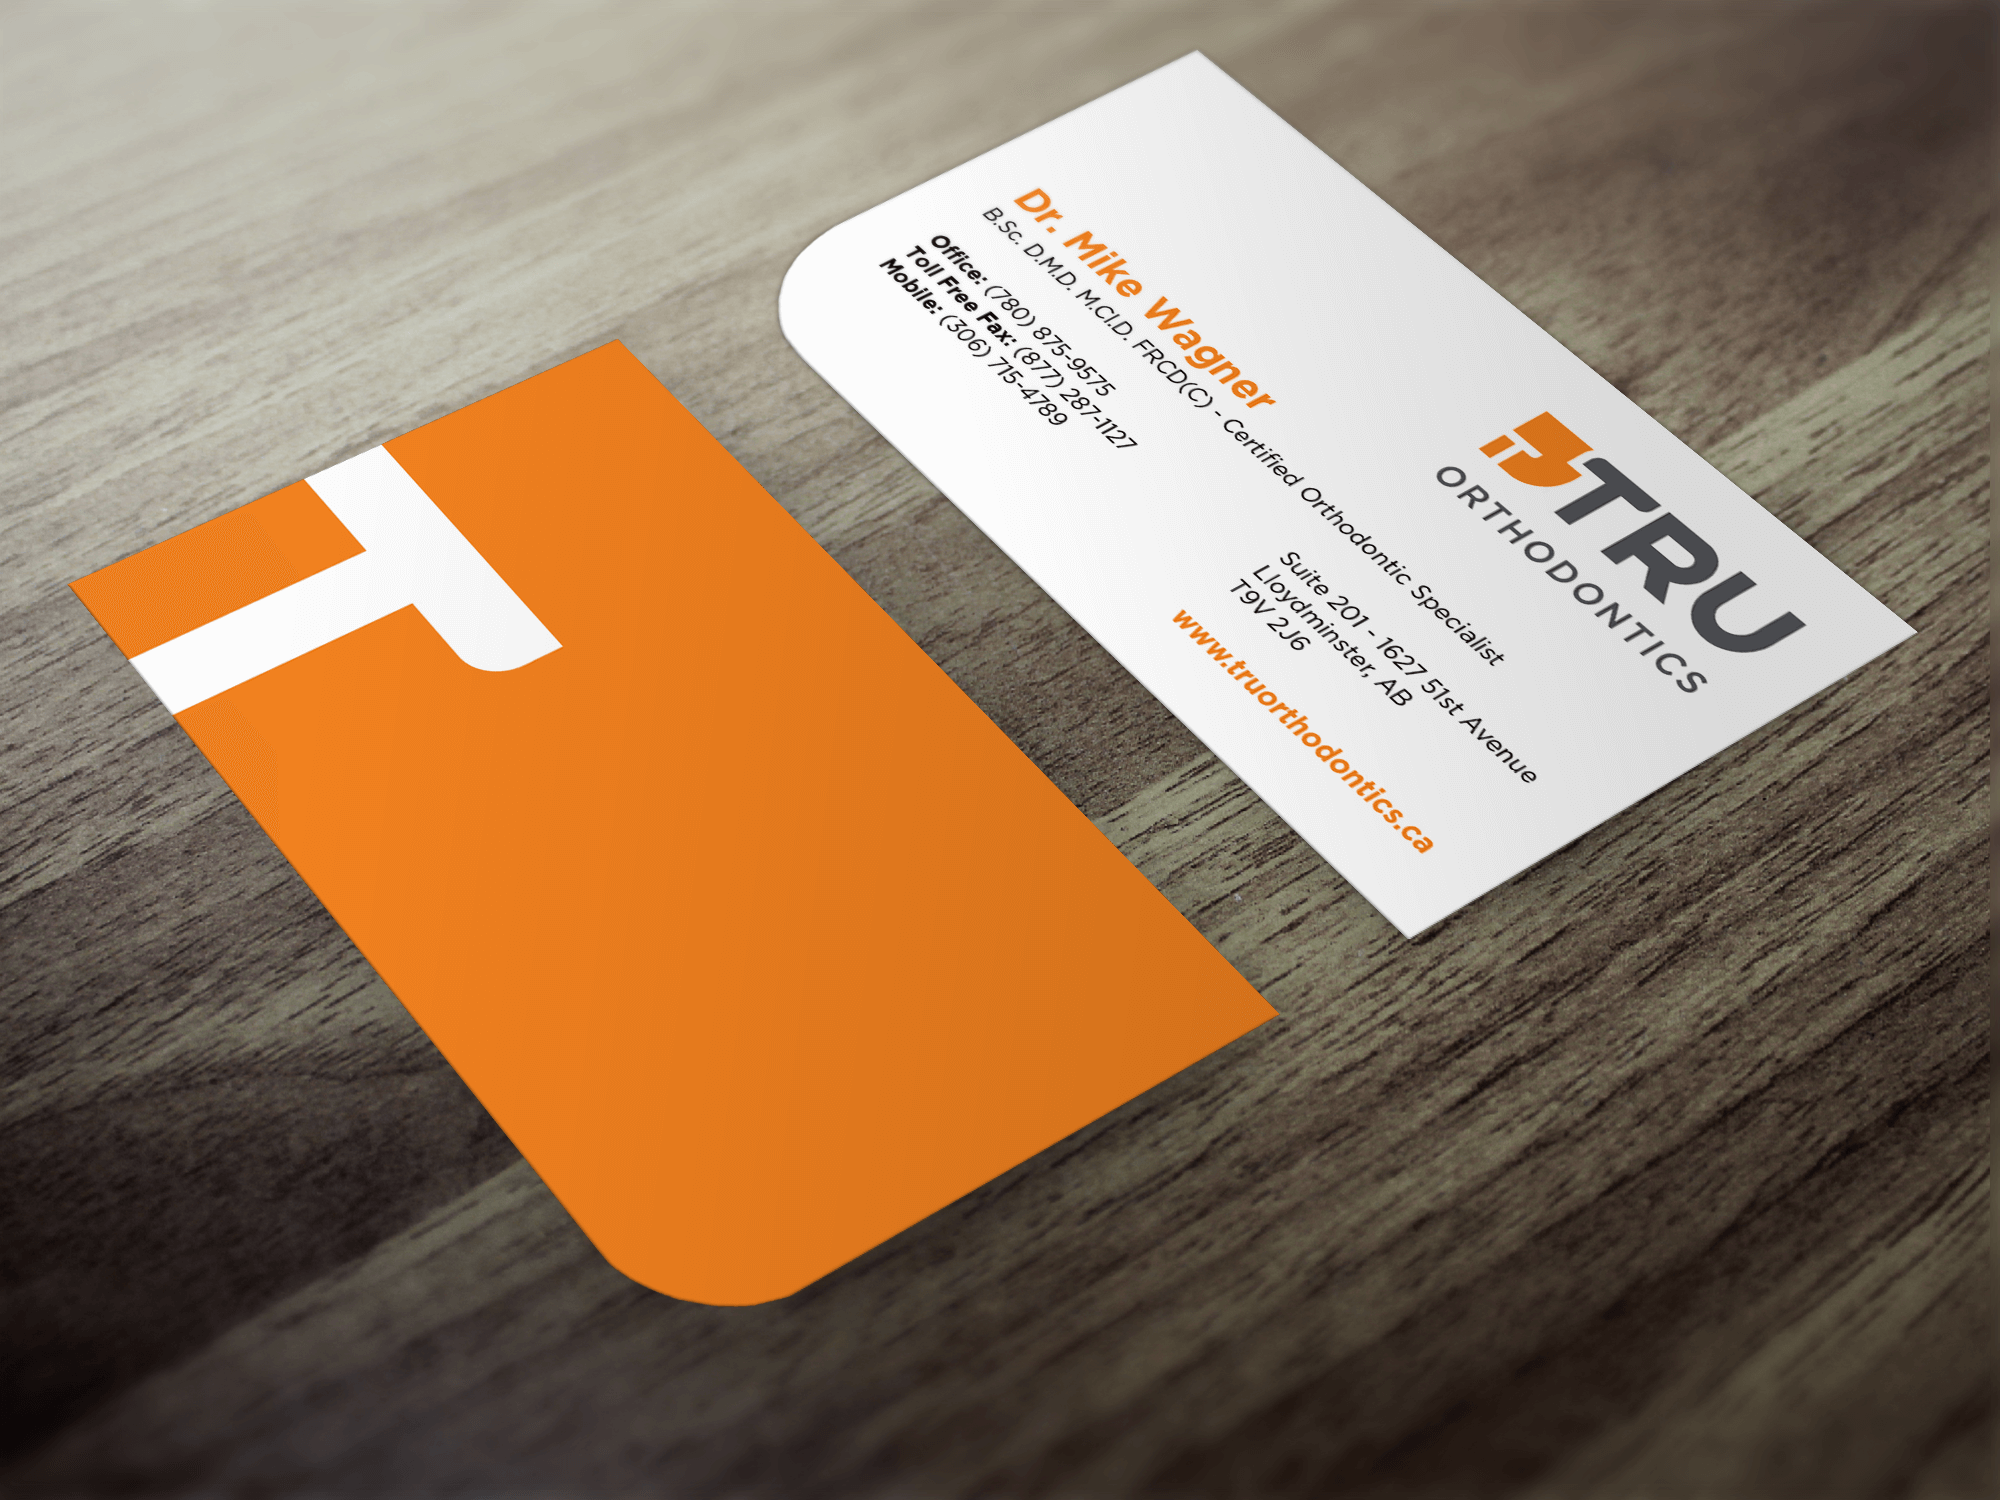 A minimalist business card that makes an impact with colour and shape